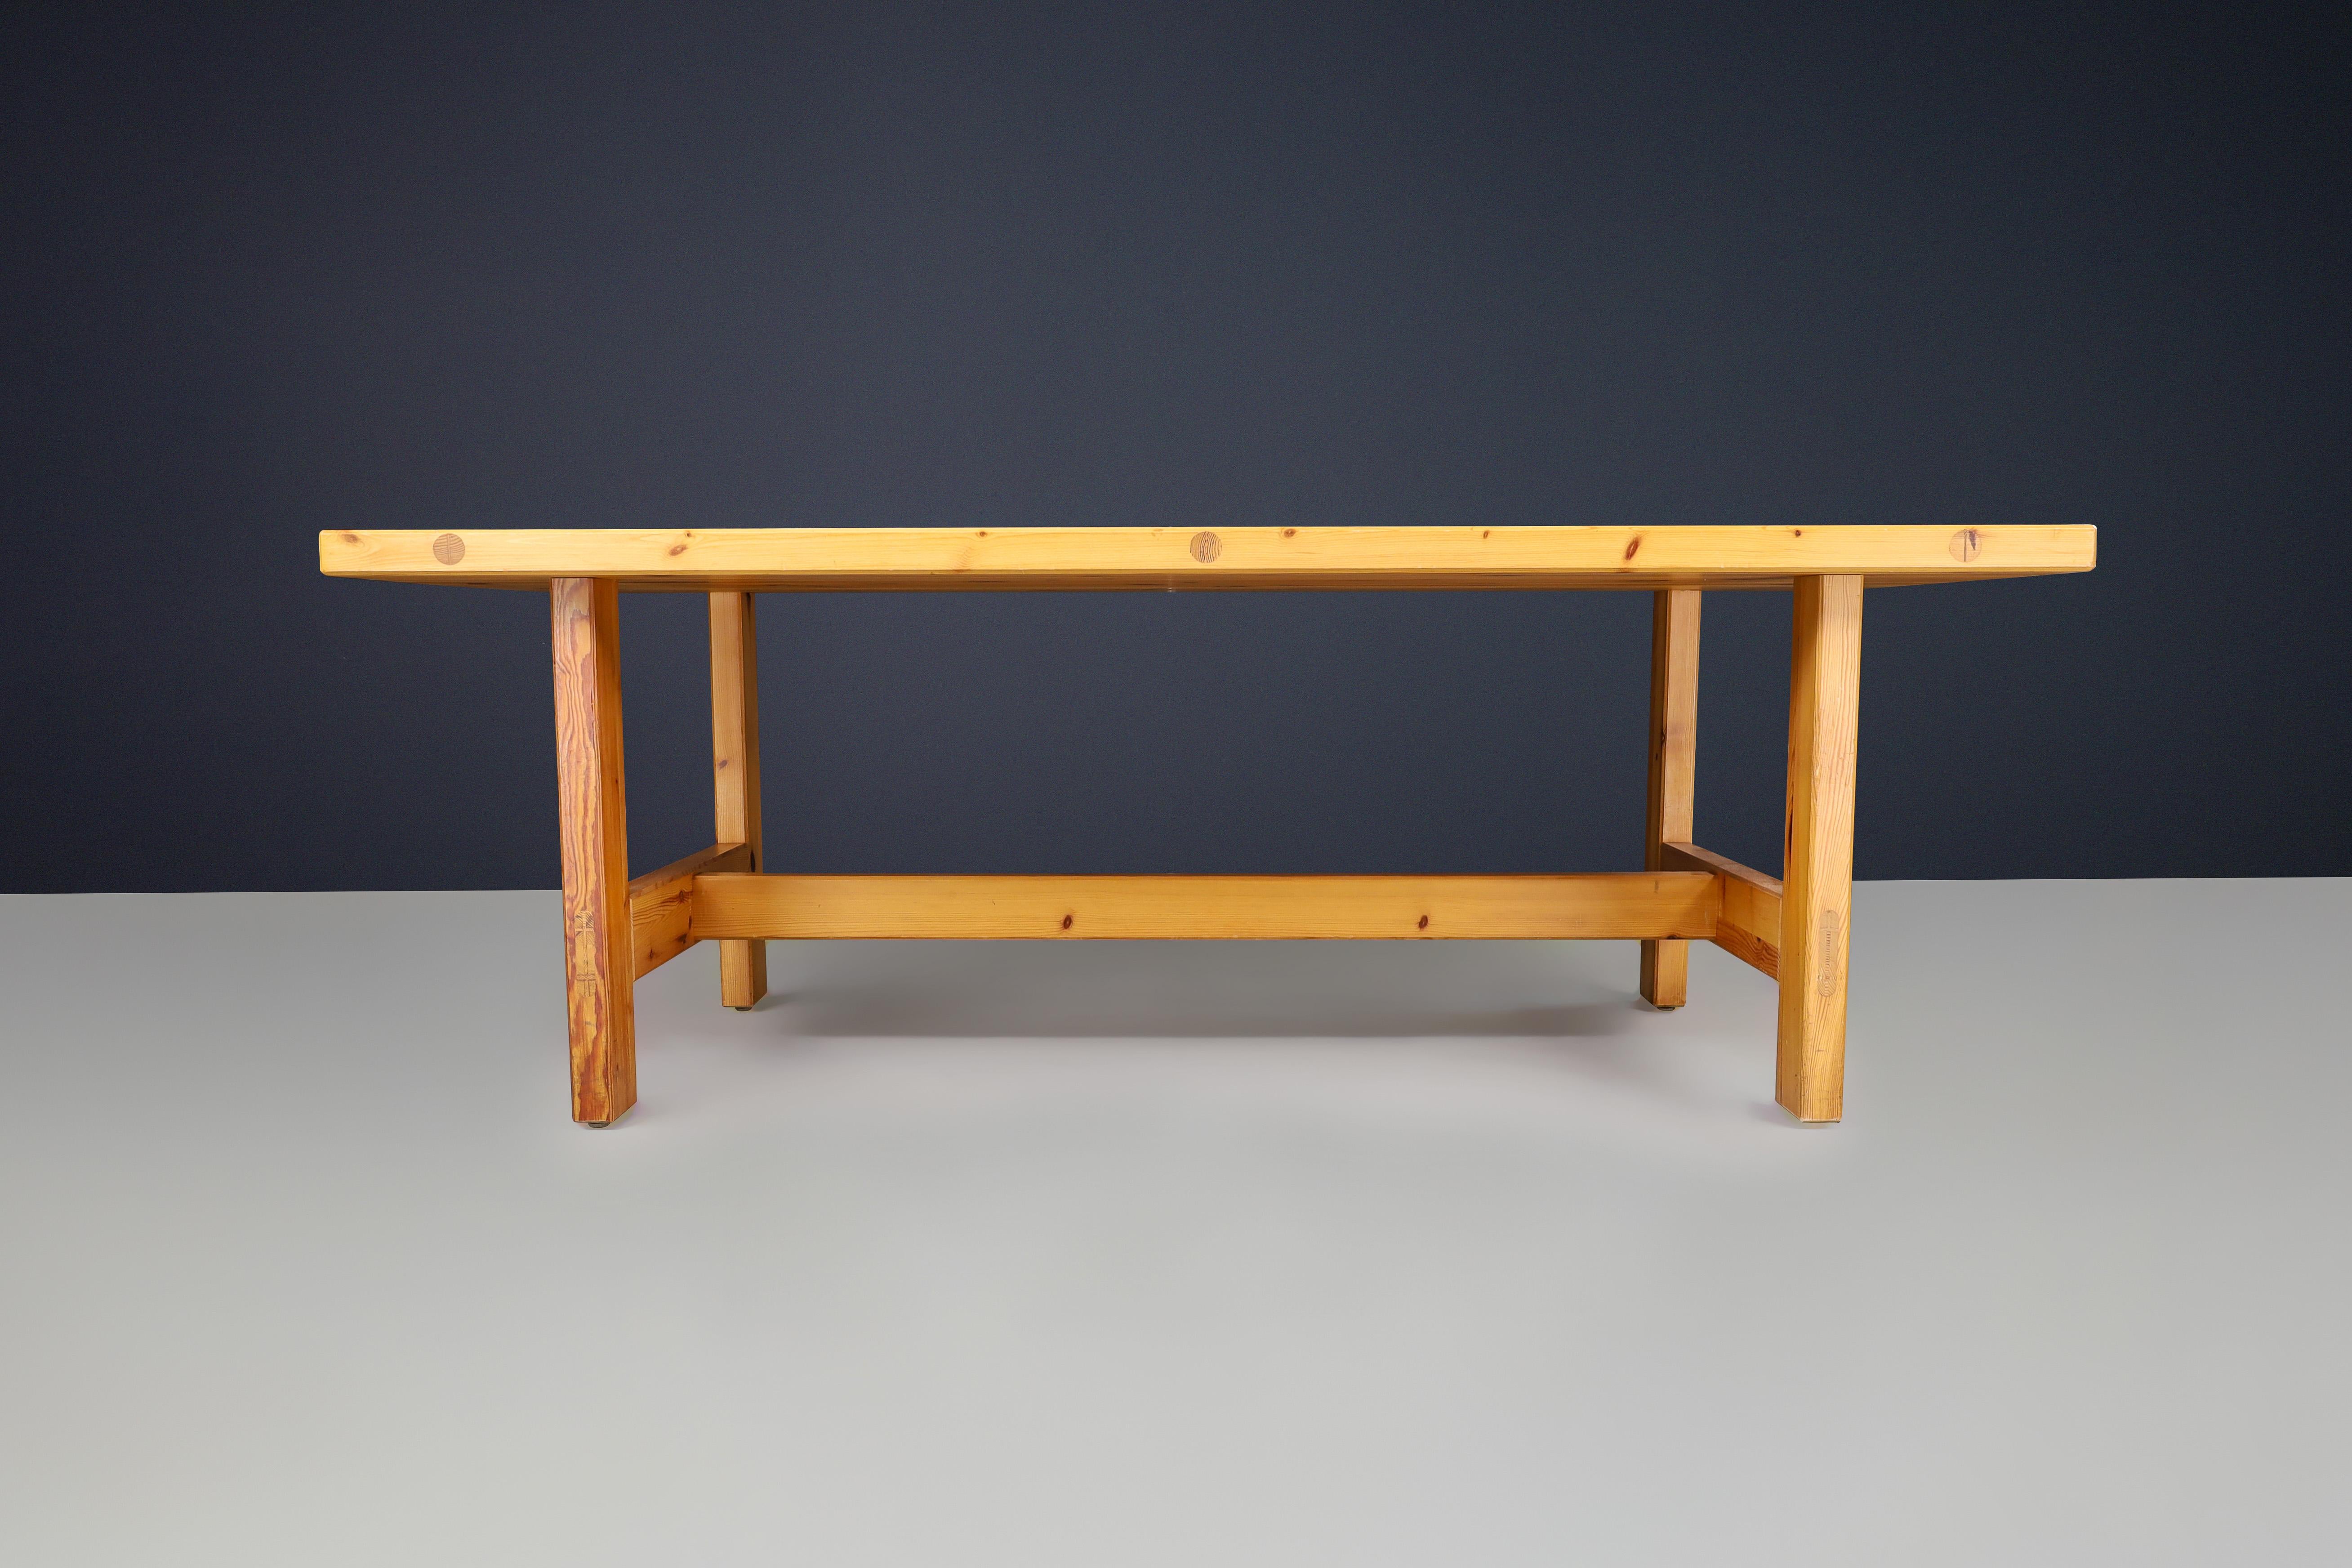 Roland Wilhelmsson for Karl Andersson & Söner Large rectangular Solid Pine Table Sweden 1970.

This is a description of a massive Swedish pine dining table designed by Roland Wilhelmsson for Karl Andersson & Söner in the 1970s. The table has a